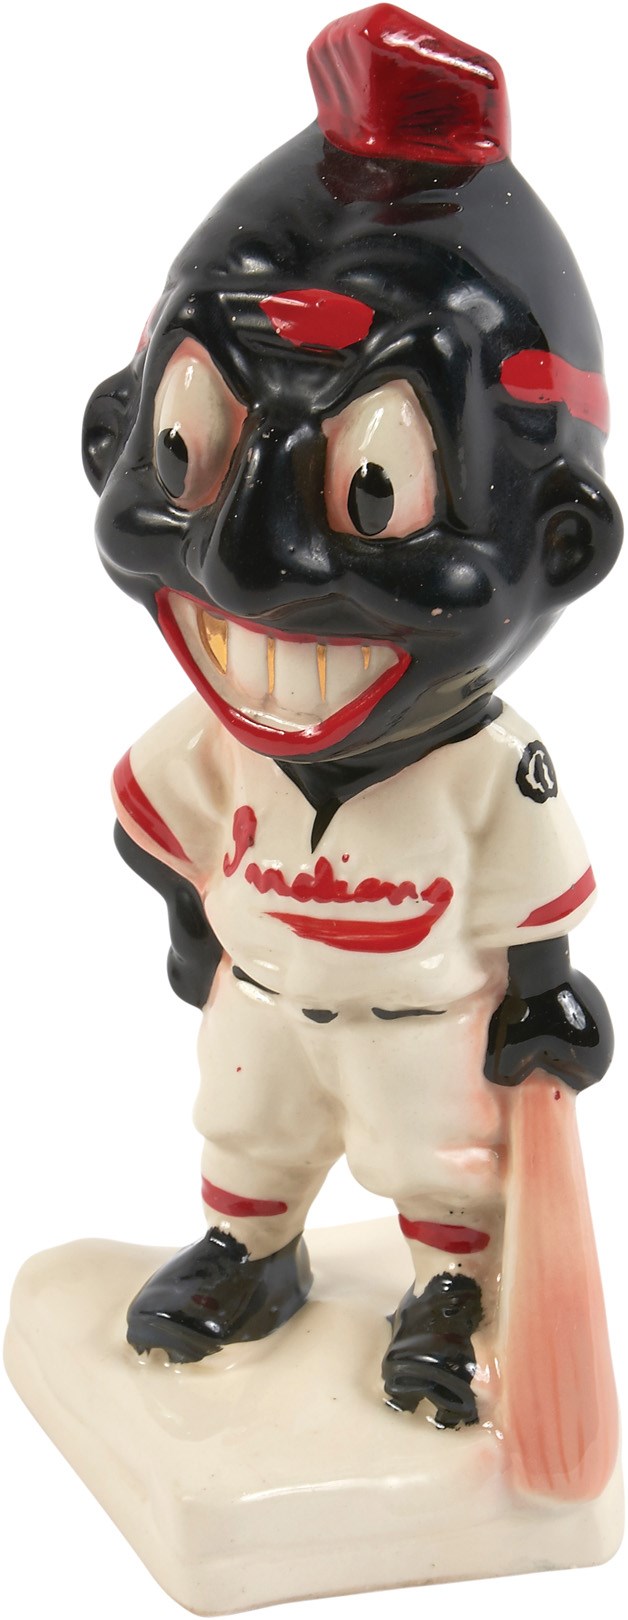 Circa 1947 Larry Doby "Black Face" Stanford Pottery Bank (One-of-a-Kind)